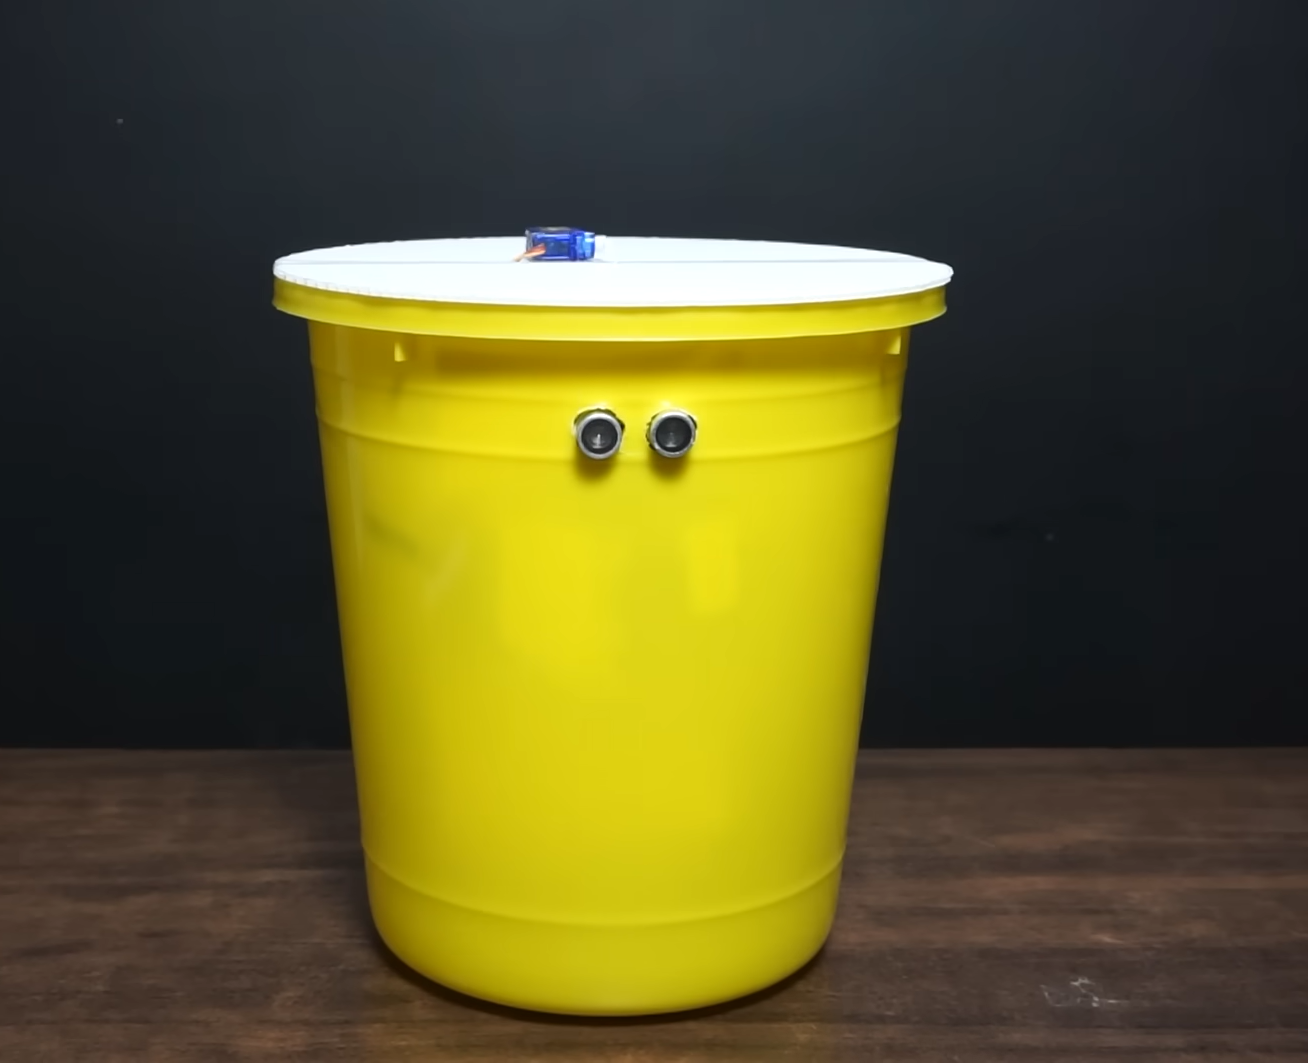 Arduino-Powered Touch-Free Trash Can